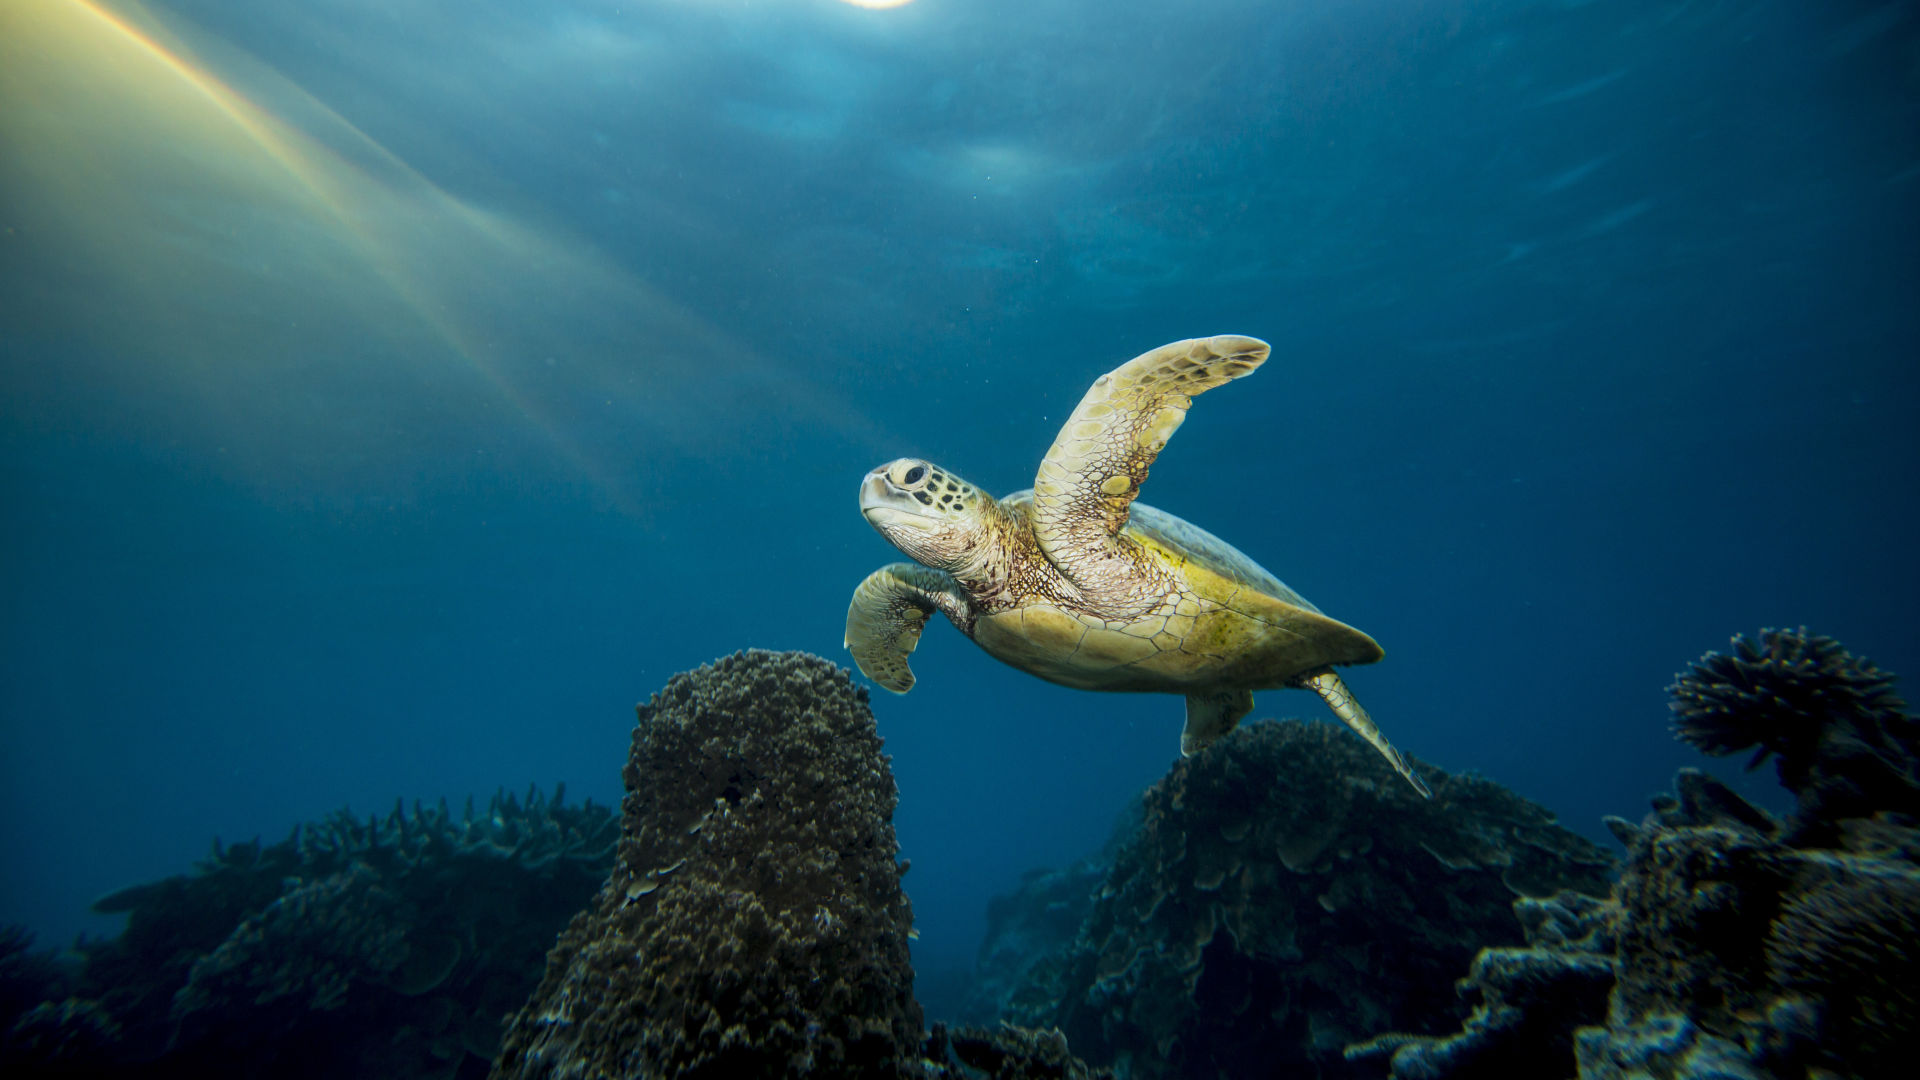 The oldest known sea turtle fossil is at least 120 million years old, making sea turtles some of the oldest creatures on the planet.